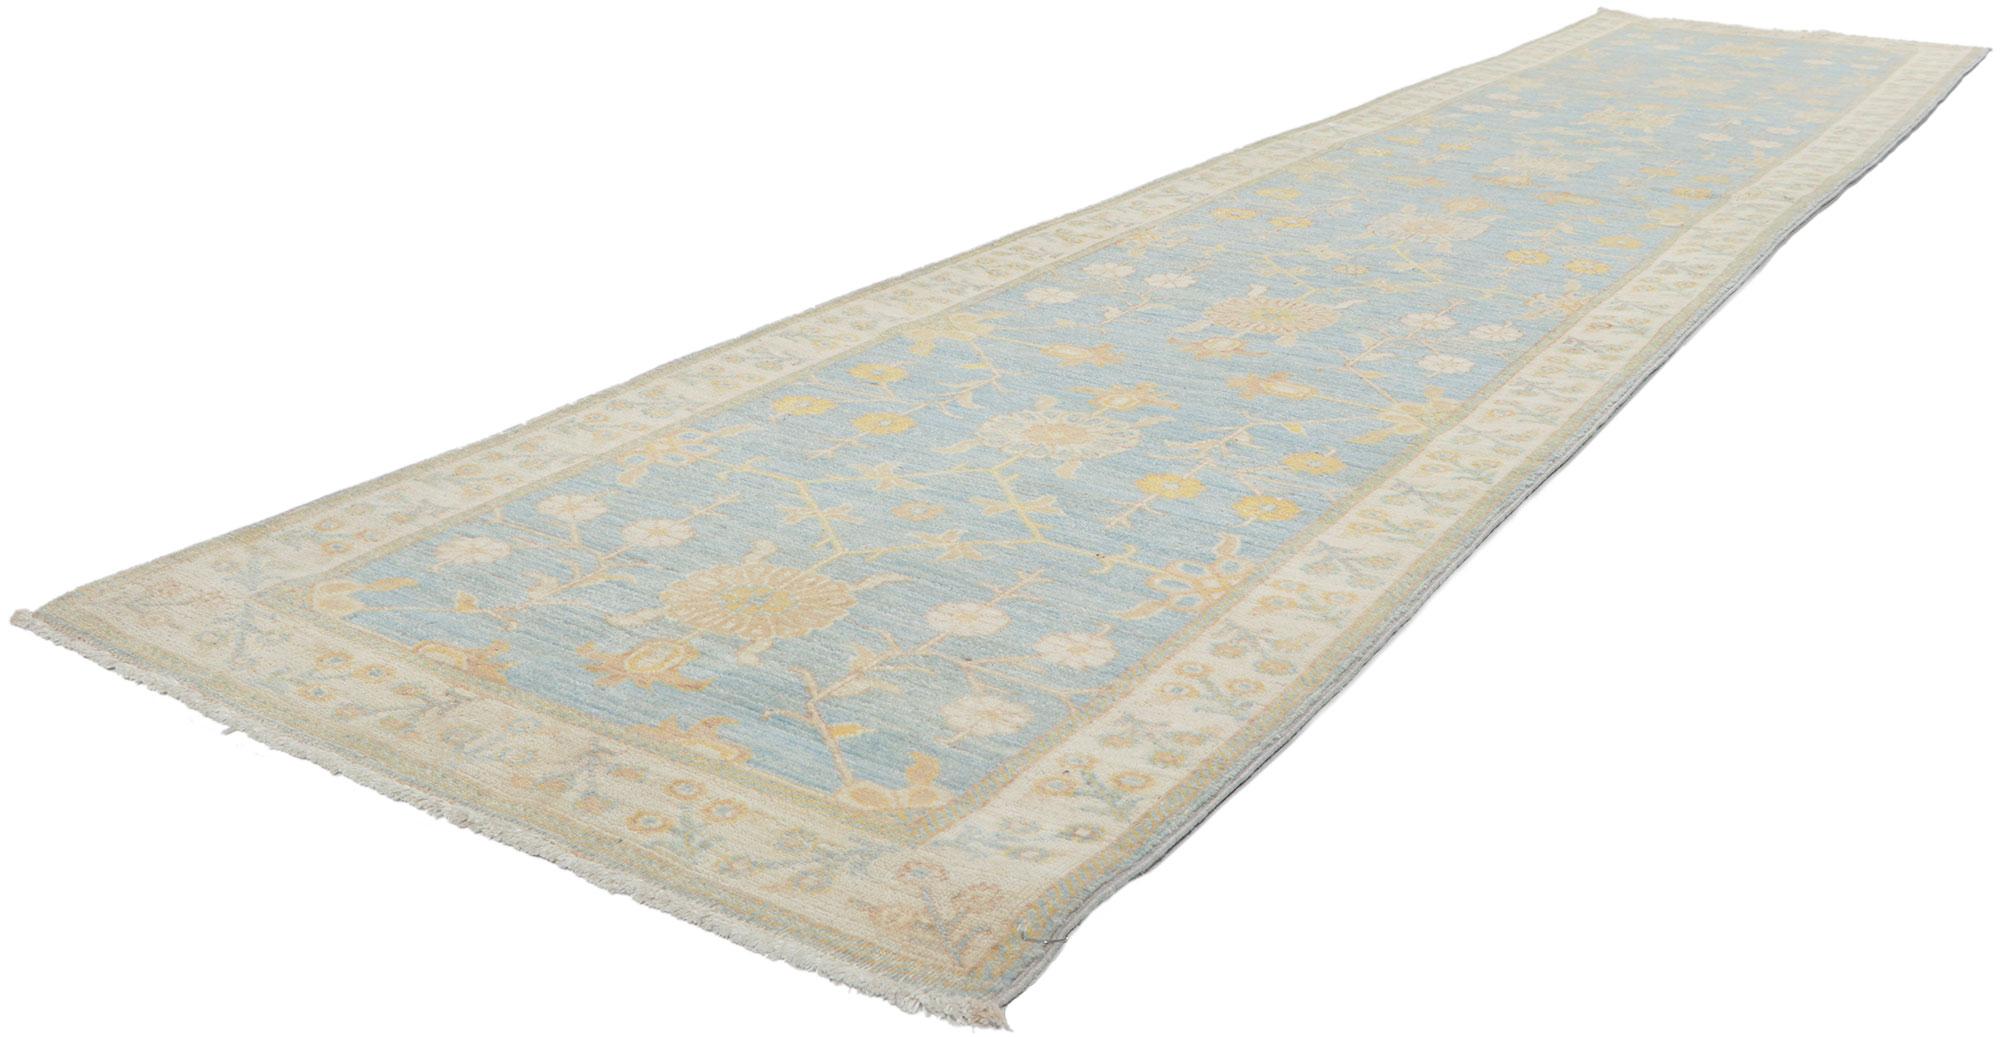 80976 New Contemporary oushak runner with soft colors, 02'07 x 12'04. The classic style and soft colors are tranquil and sophisticated. With its timeless design and understated elegance, this versatile Oushak carpet runner will create a welcoming